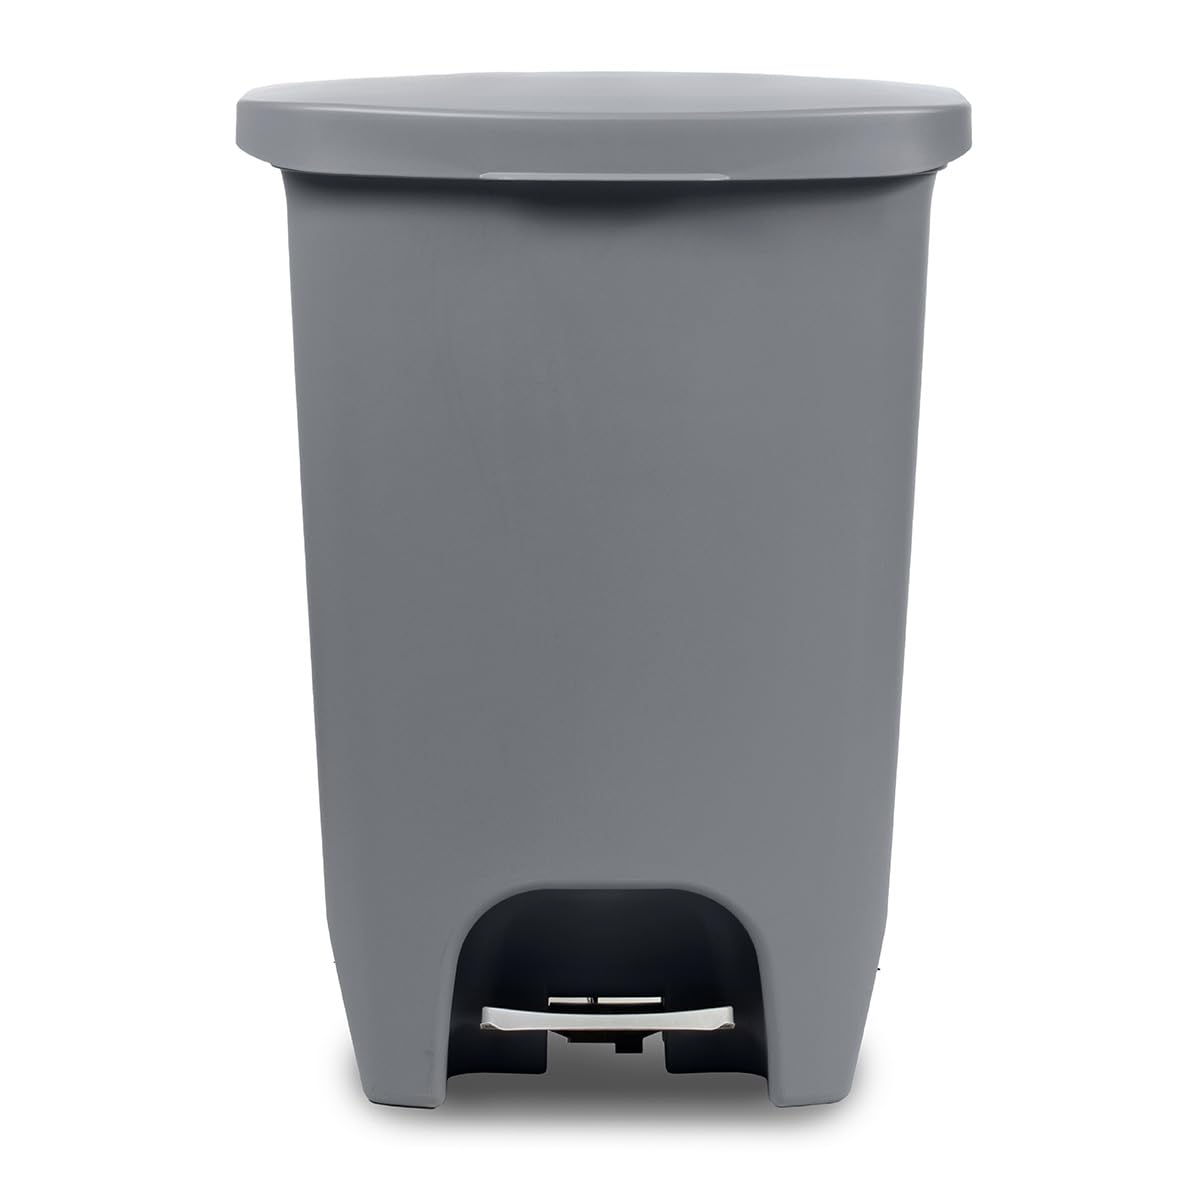 https://bigbigmart.com/wp-content/uploads/2023/10/Glad-Trash-Can-Plastic-Kitchen-Waste-Bin-with-Odor-Protection-of-Lid-Hands-Free-with-Step-On-Foot-Pedal-and-Garbage-Bag-Rings-13-Gallon-Grey5.jpg